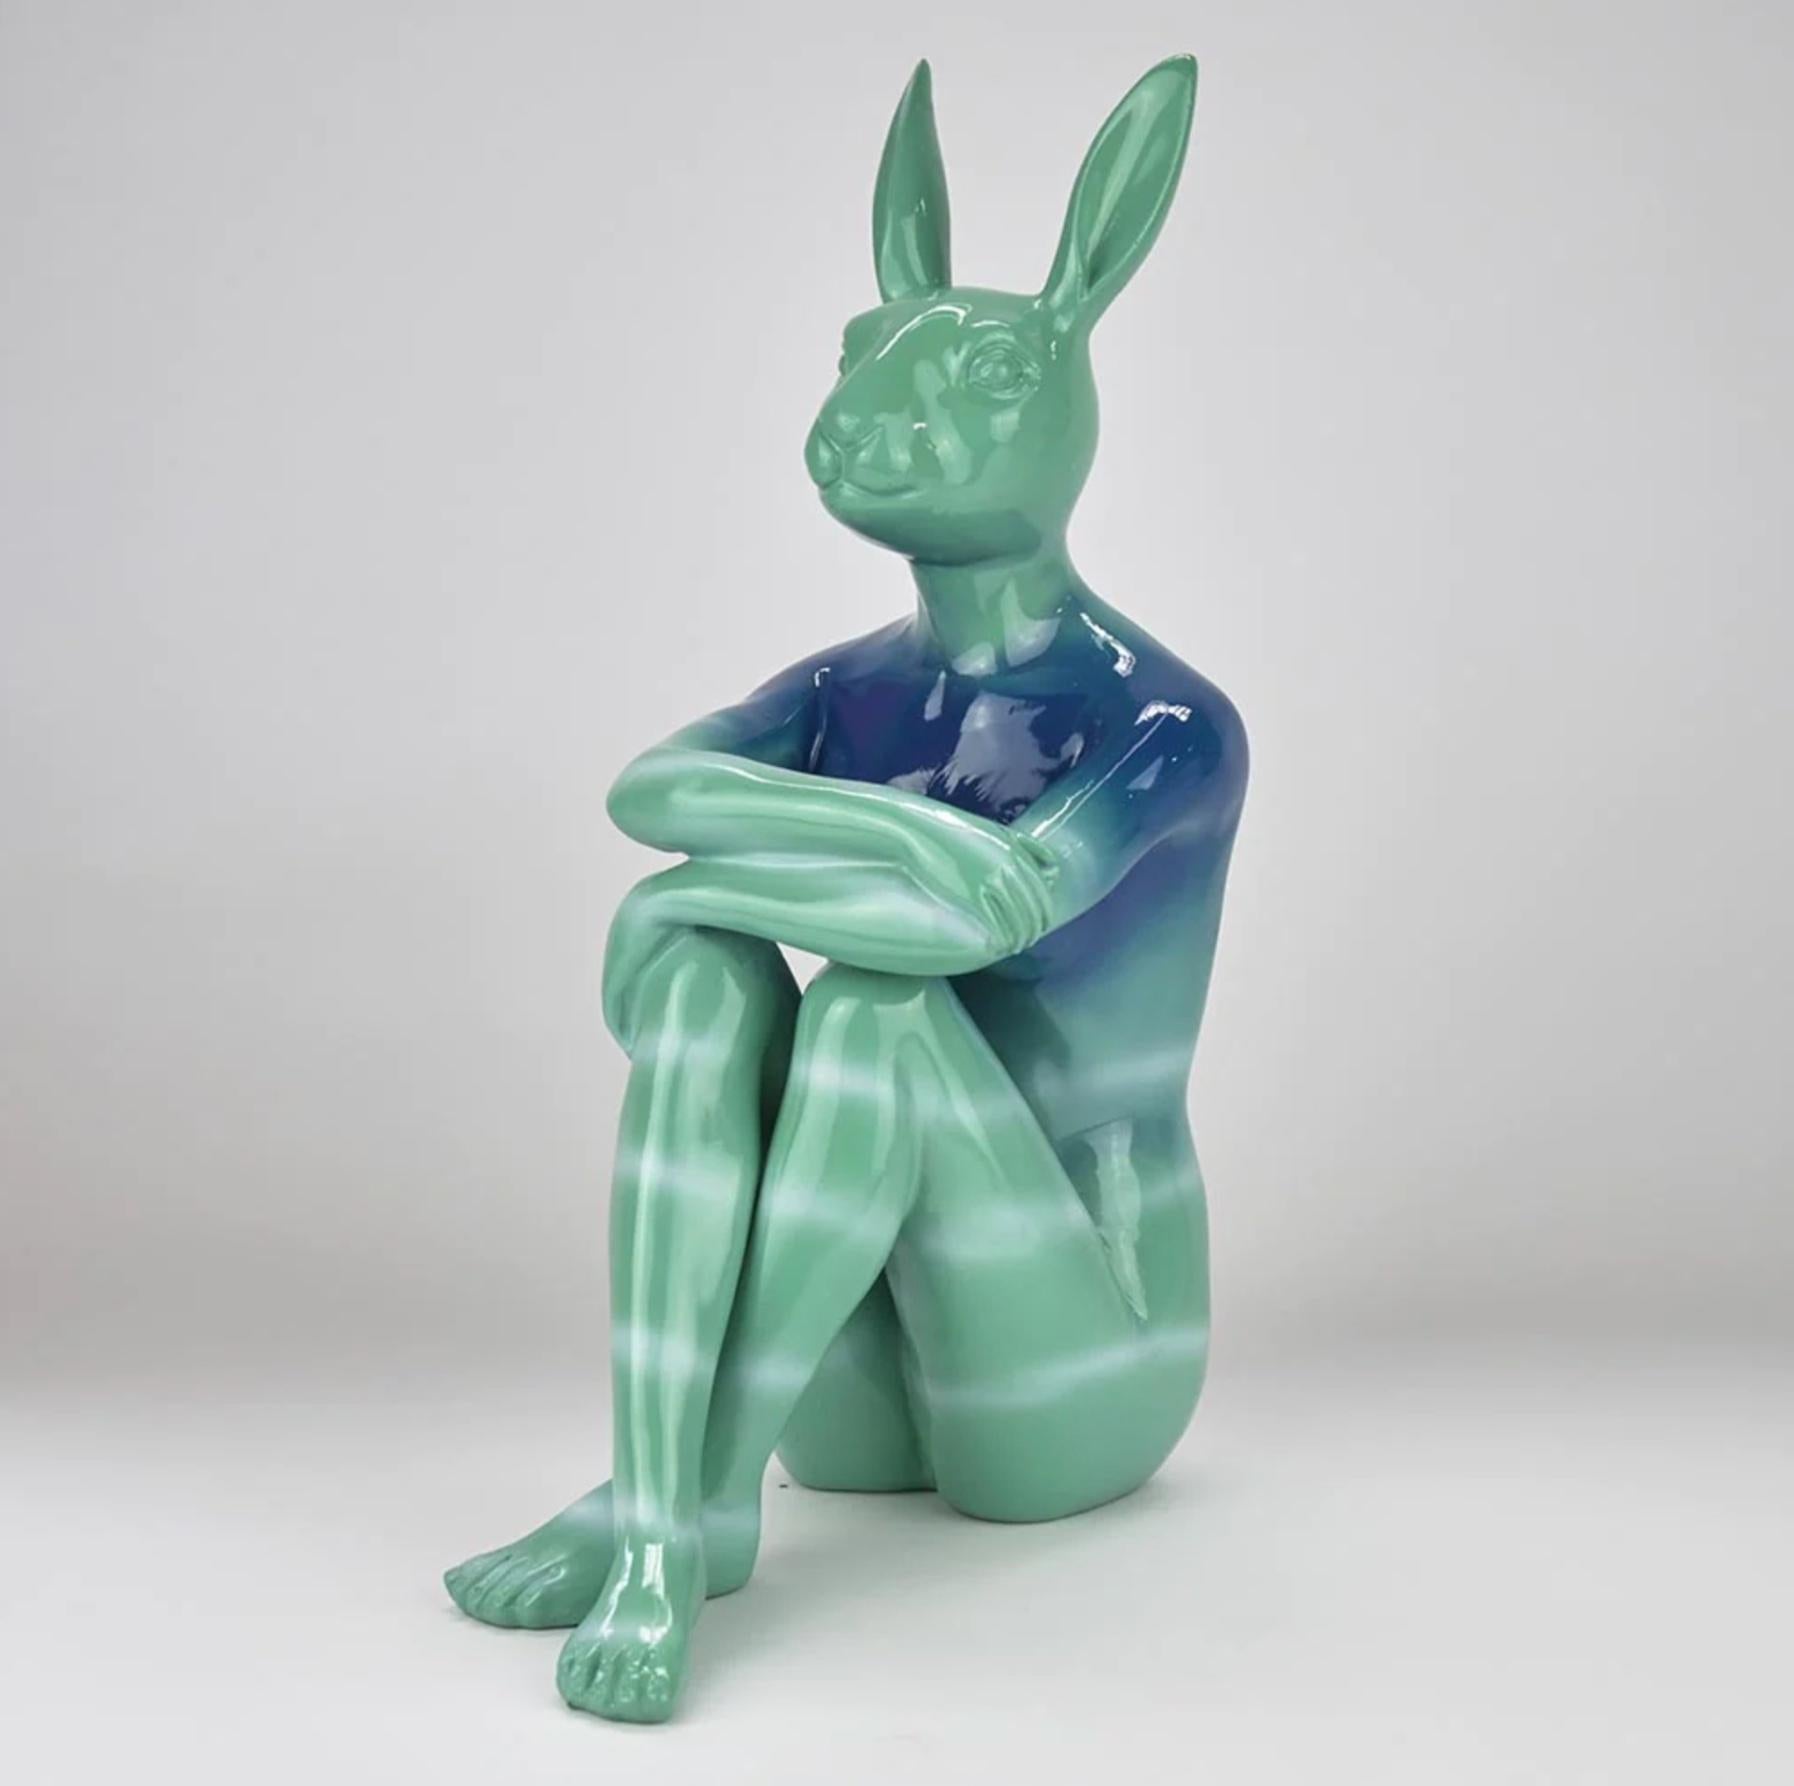 Gillie and Marc Schattner Figurative Sculpture - Authentic Resin Splash Pop City Bunny Sculpture by Gillie and Marc 